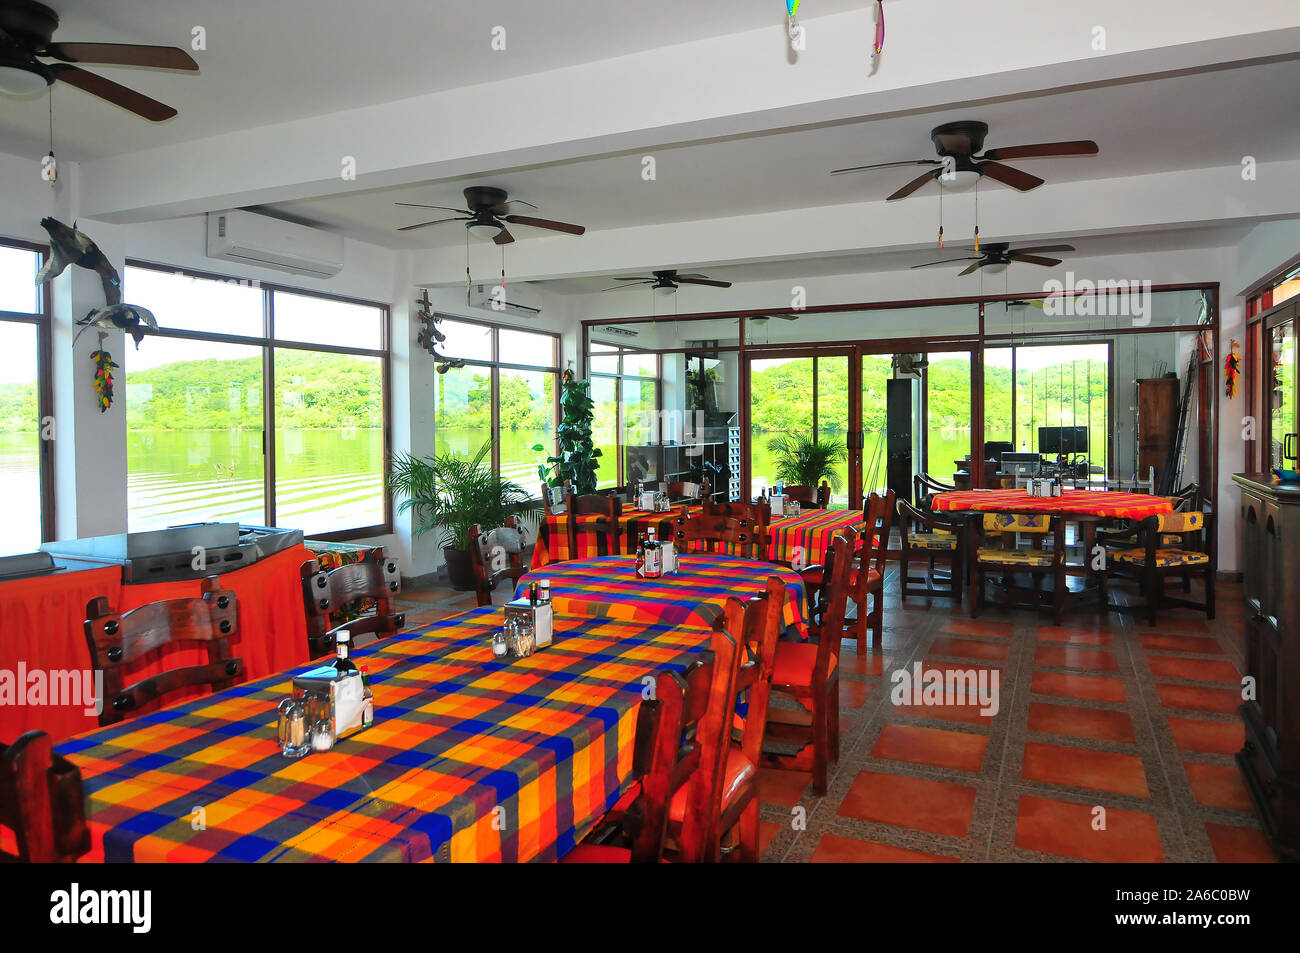 The Anglers Inn Resort facilities at Lake Picachos in Mexico's Sierra Madre Mountains include a restaurant, bar, lounge area, boat docks and cabins. Stock Photo